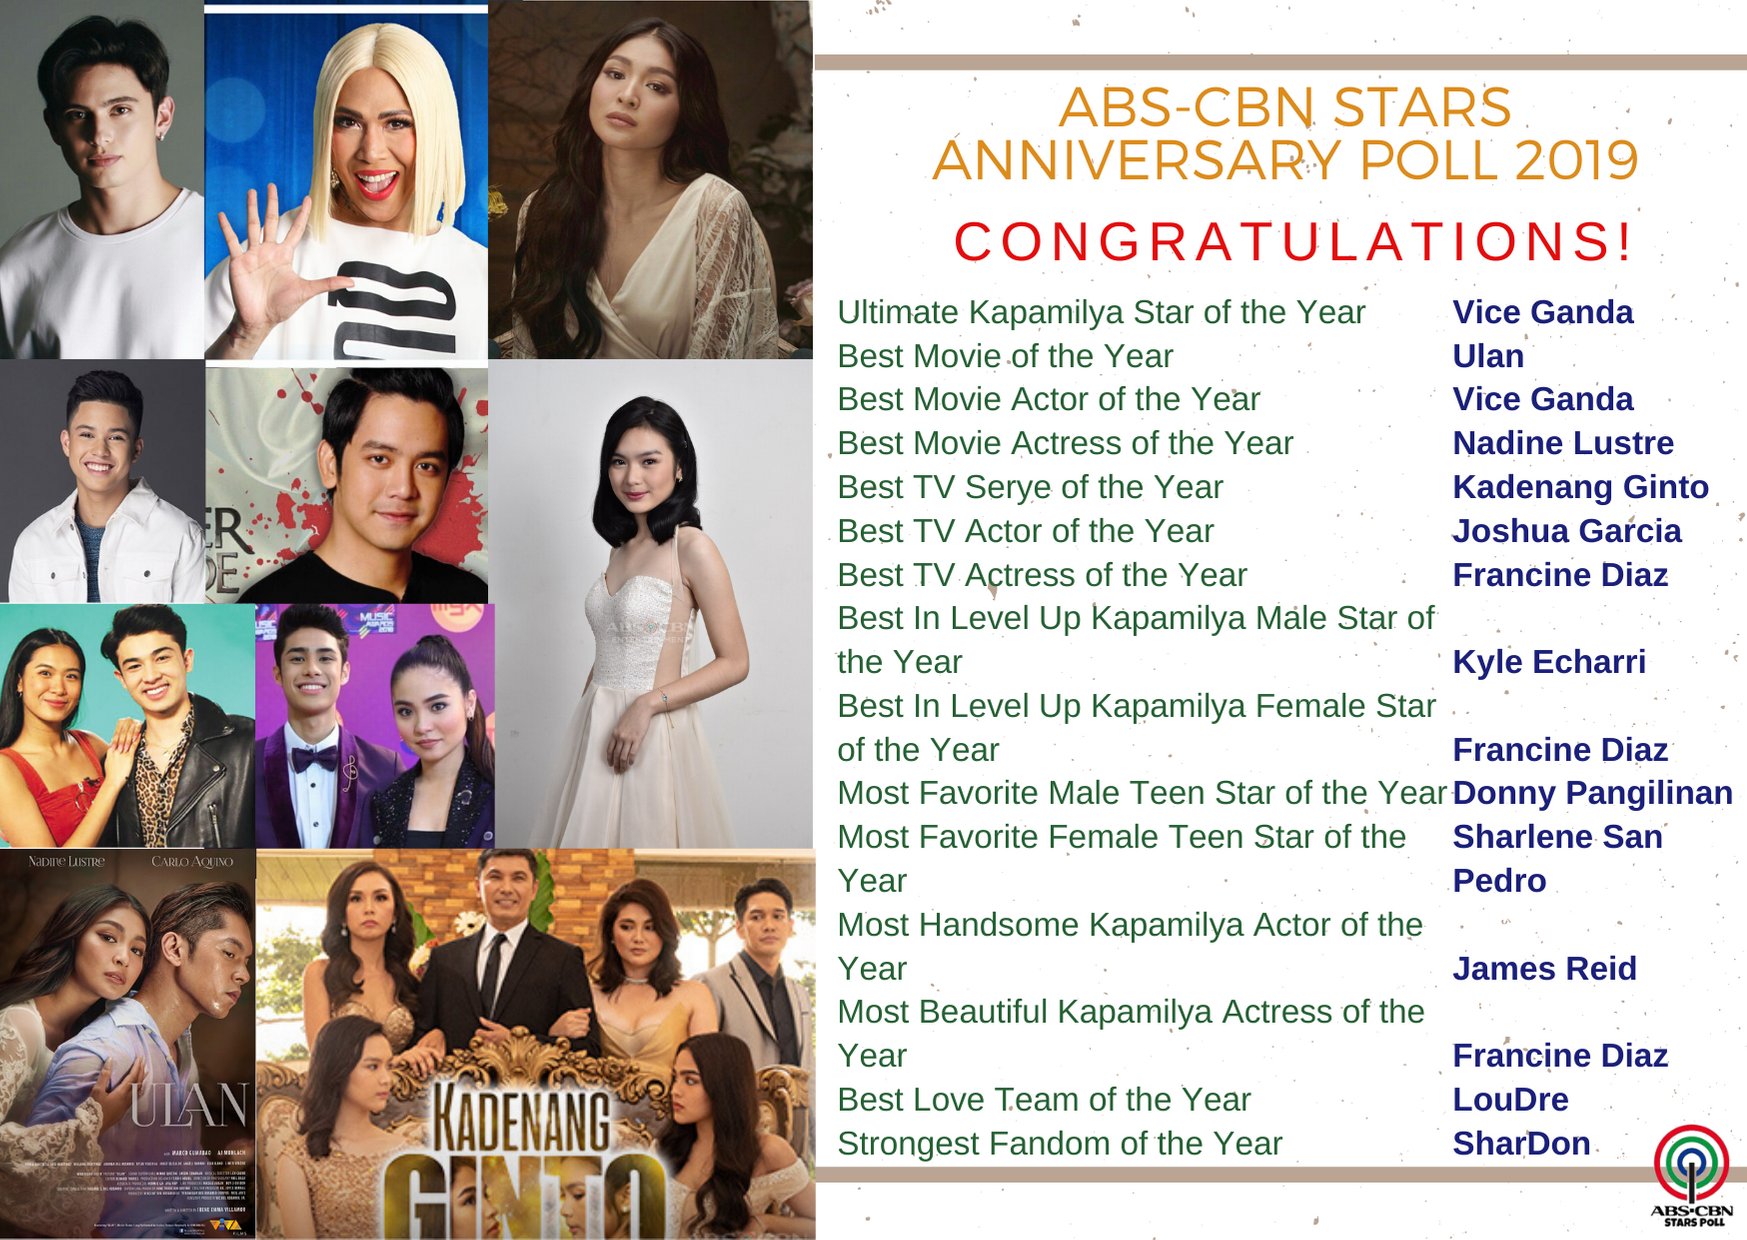 Abs Cbn Stars Poll On Twitter Here Is The List Of Winners Of Abscbnstarsanniversarypoll2019 Thank You For Participating In Our Third Anniversary Poll See You On Our Abs Cbn Stars Anniversary Poll 2020 Congratulations